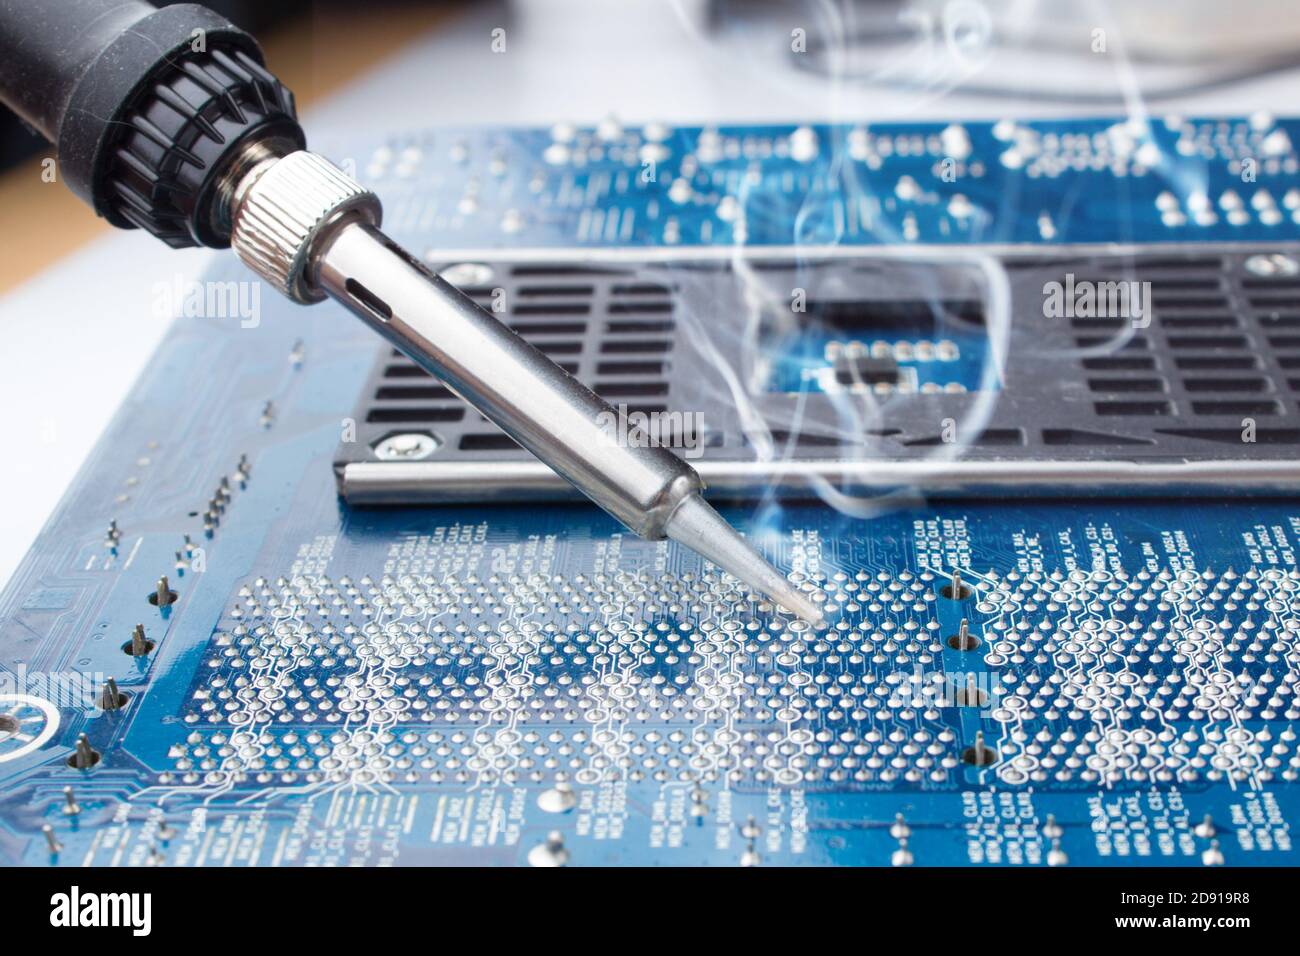 use a soldering iron to solder the electronic part to the Board. Computer repair. Macrophotography. Stock Photo